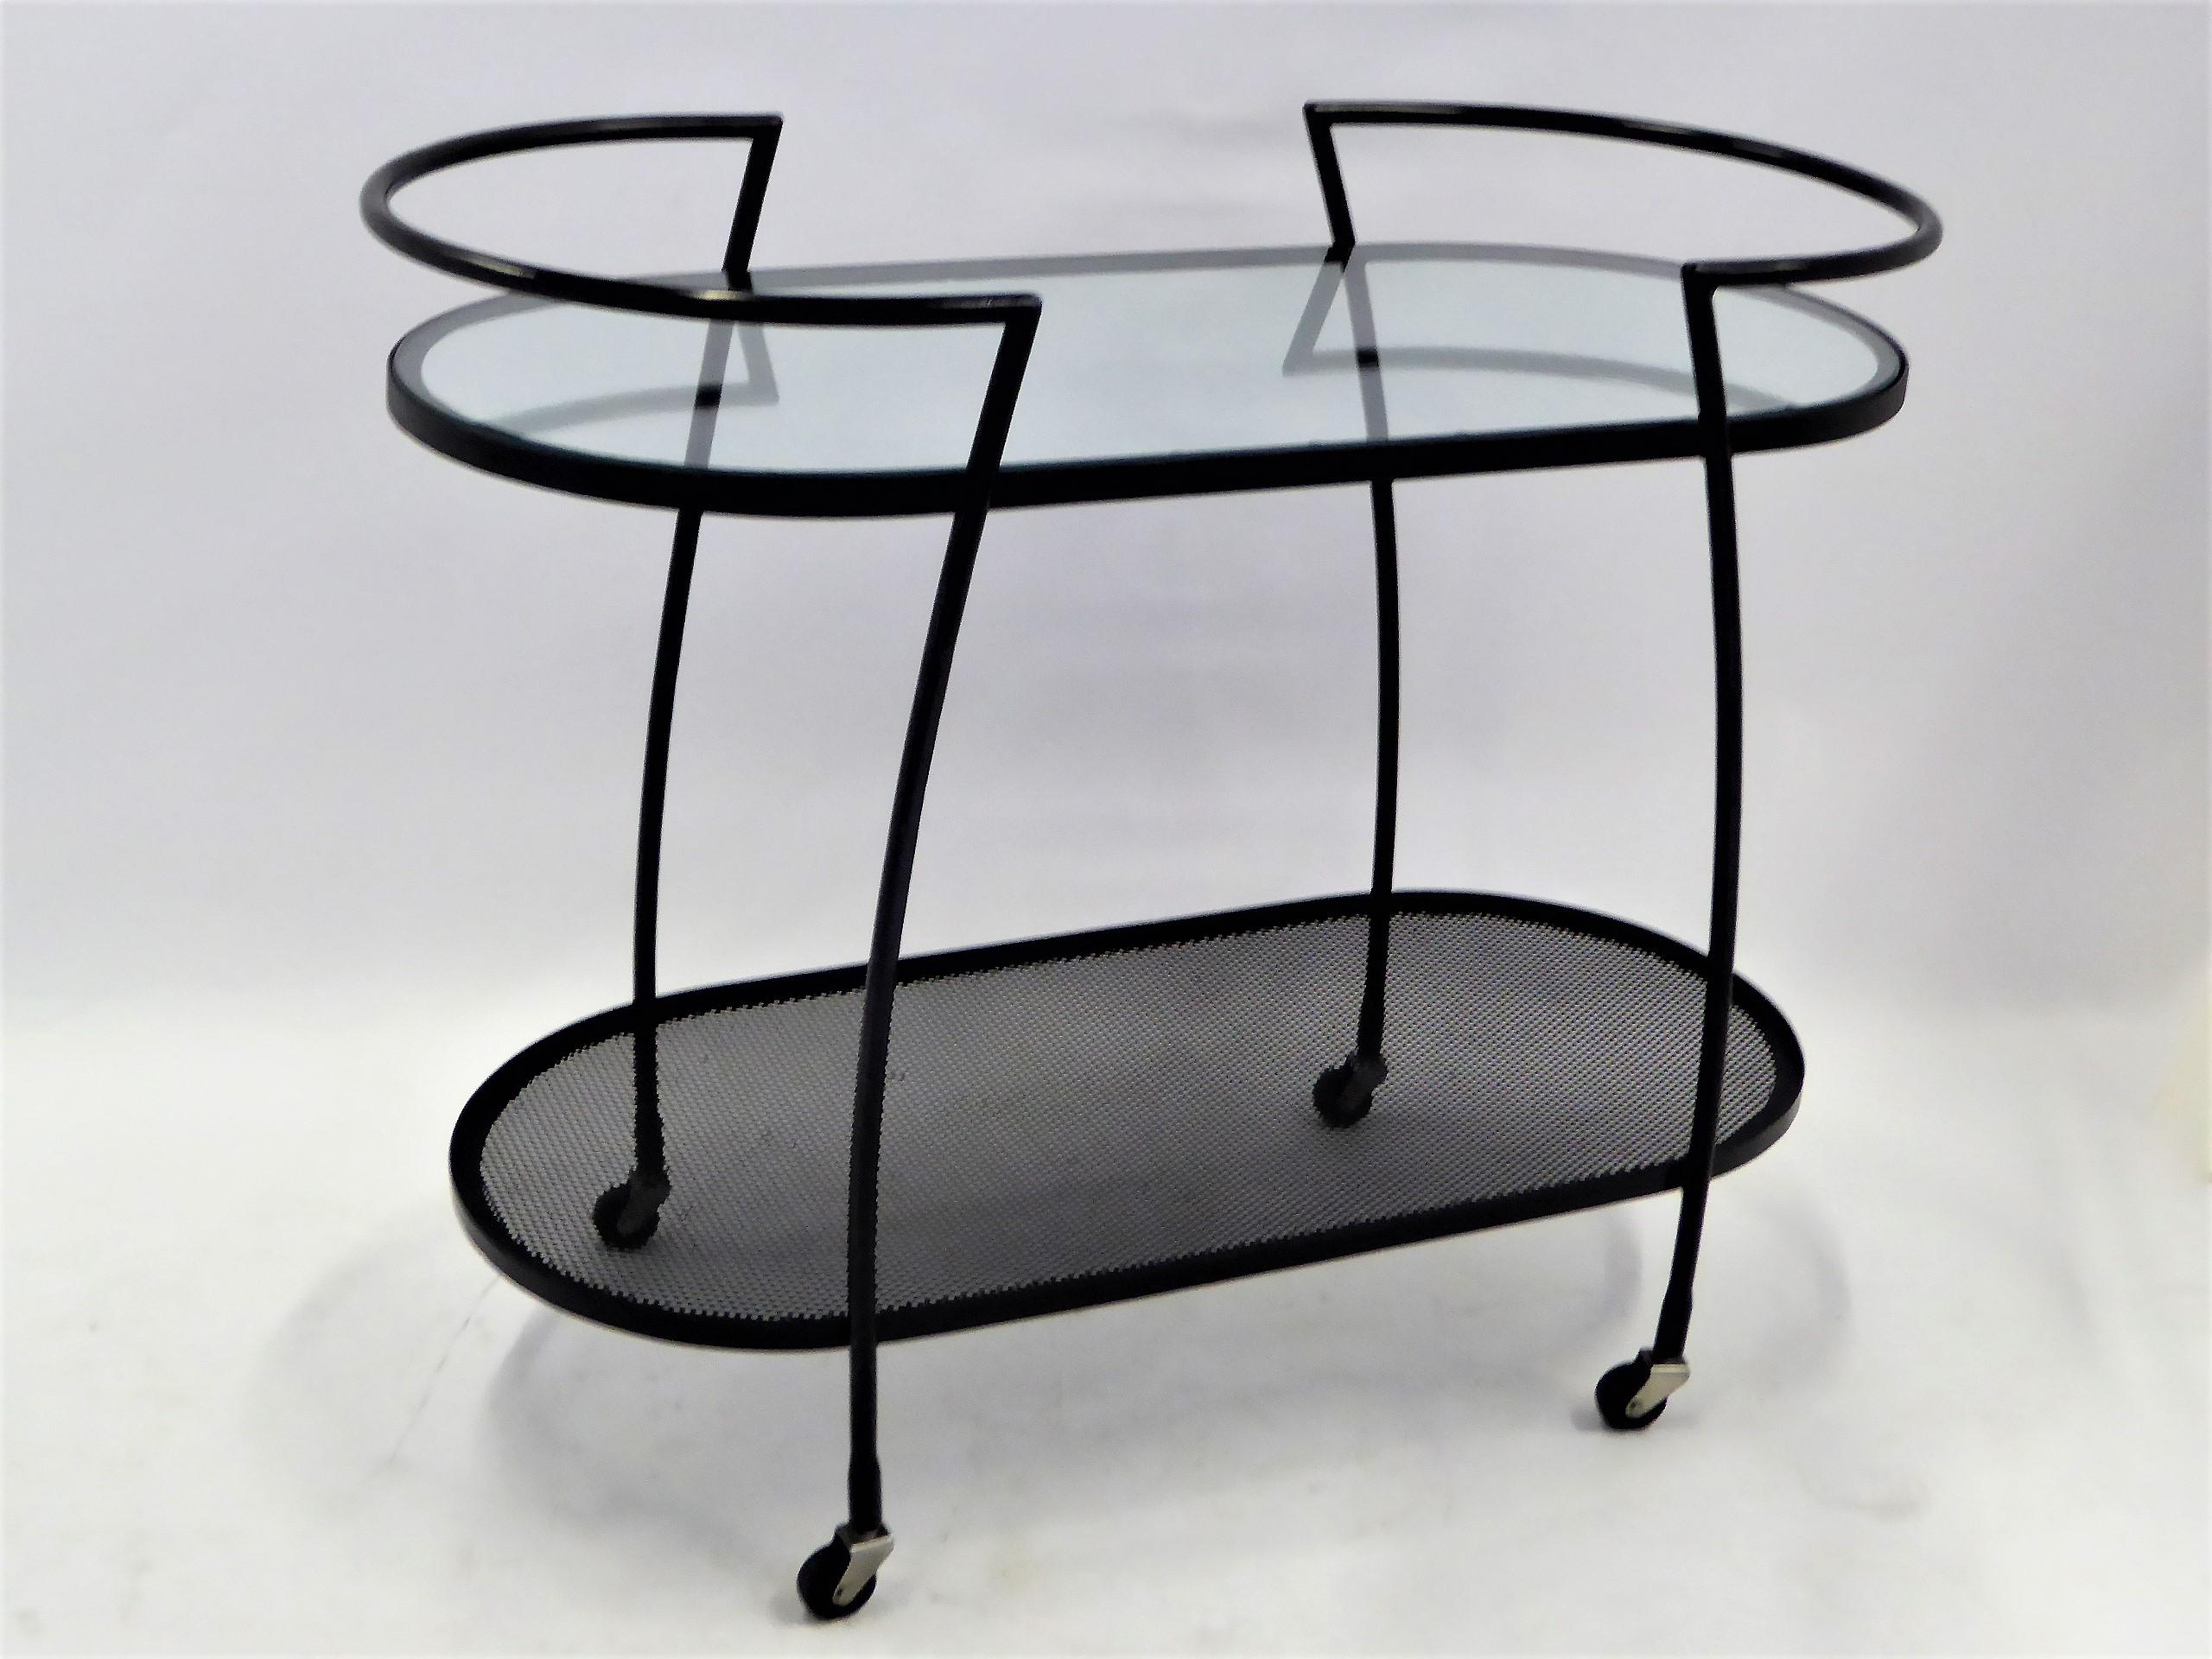 1940s streamline moderne wrought iron rolling cart with an inset glass shelf above and metal screen shelf below. The racetrack oval shape has shaped arms that continue down the sides as legs. New glass and wrought iron re-patinated. After the styles